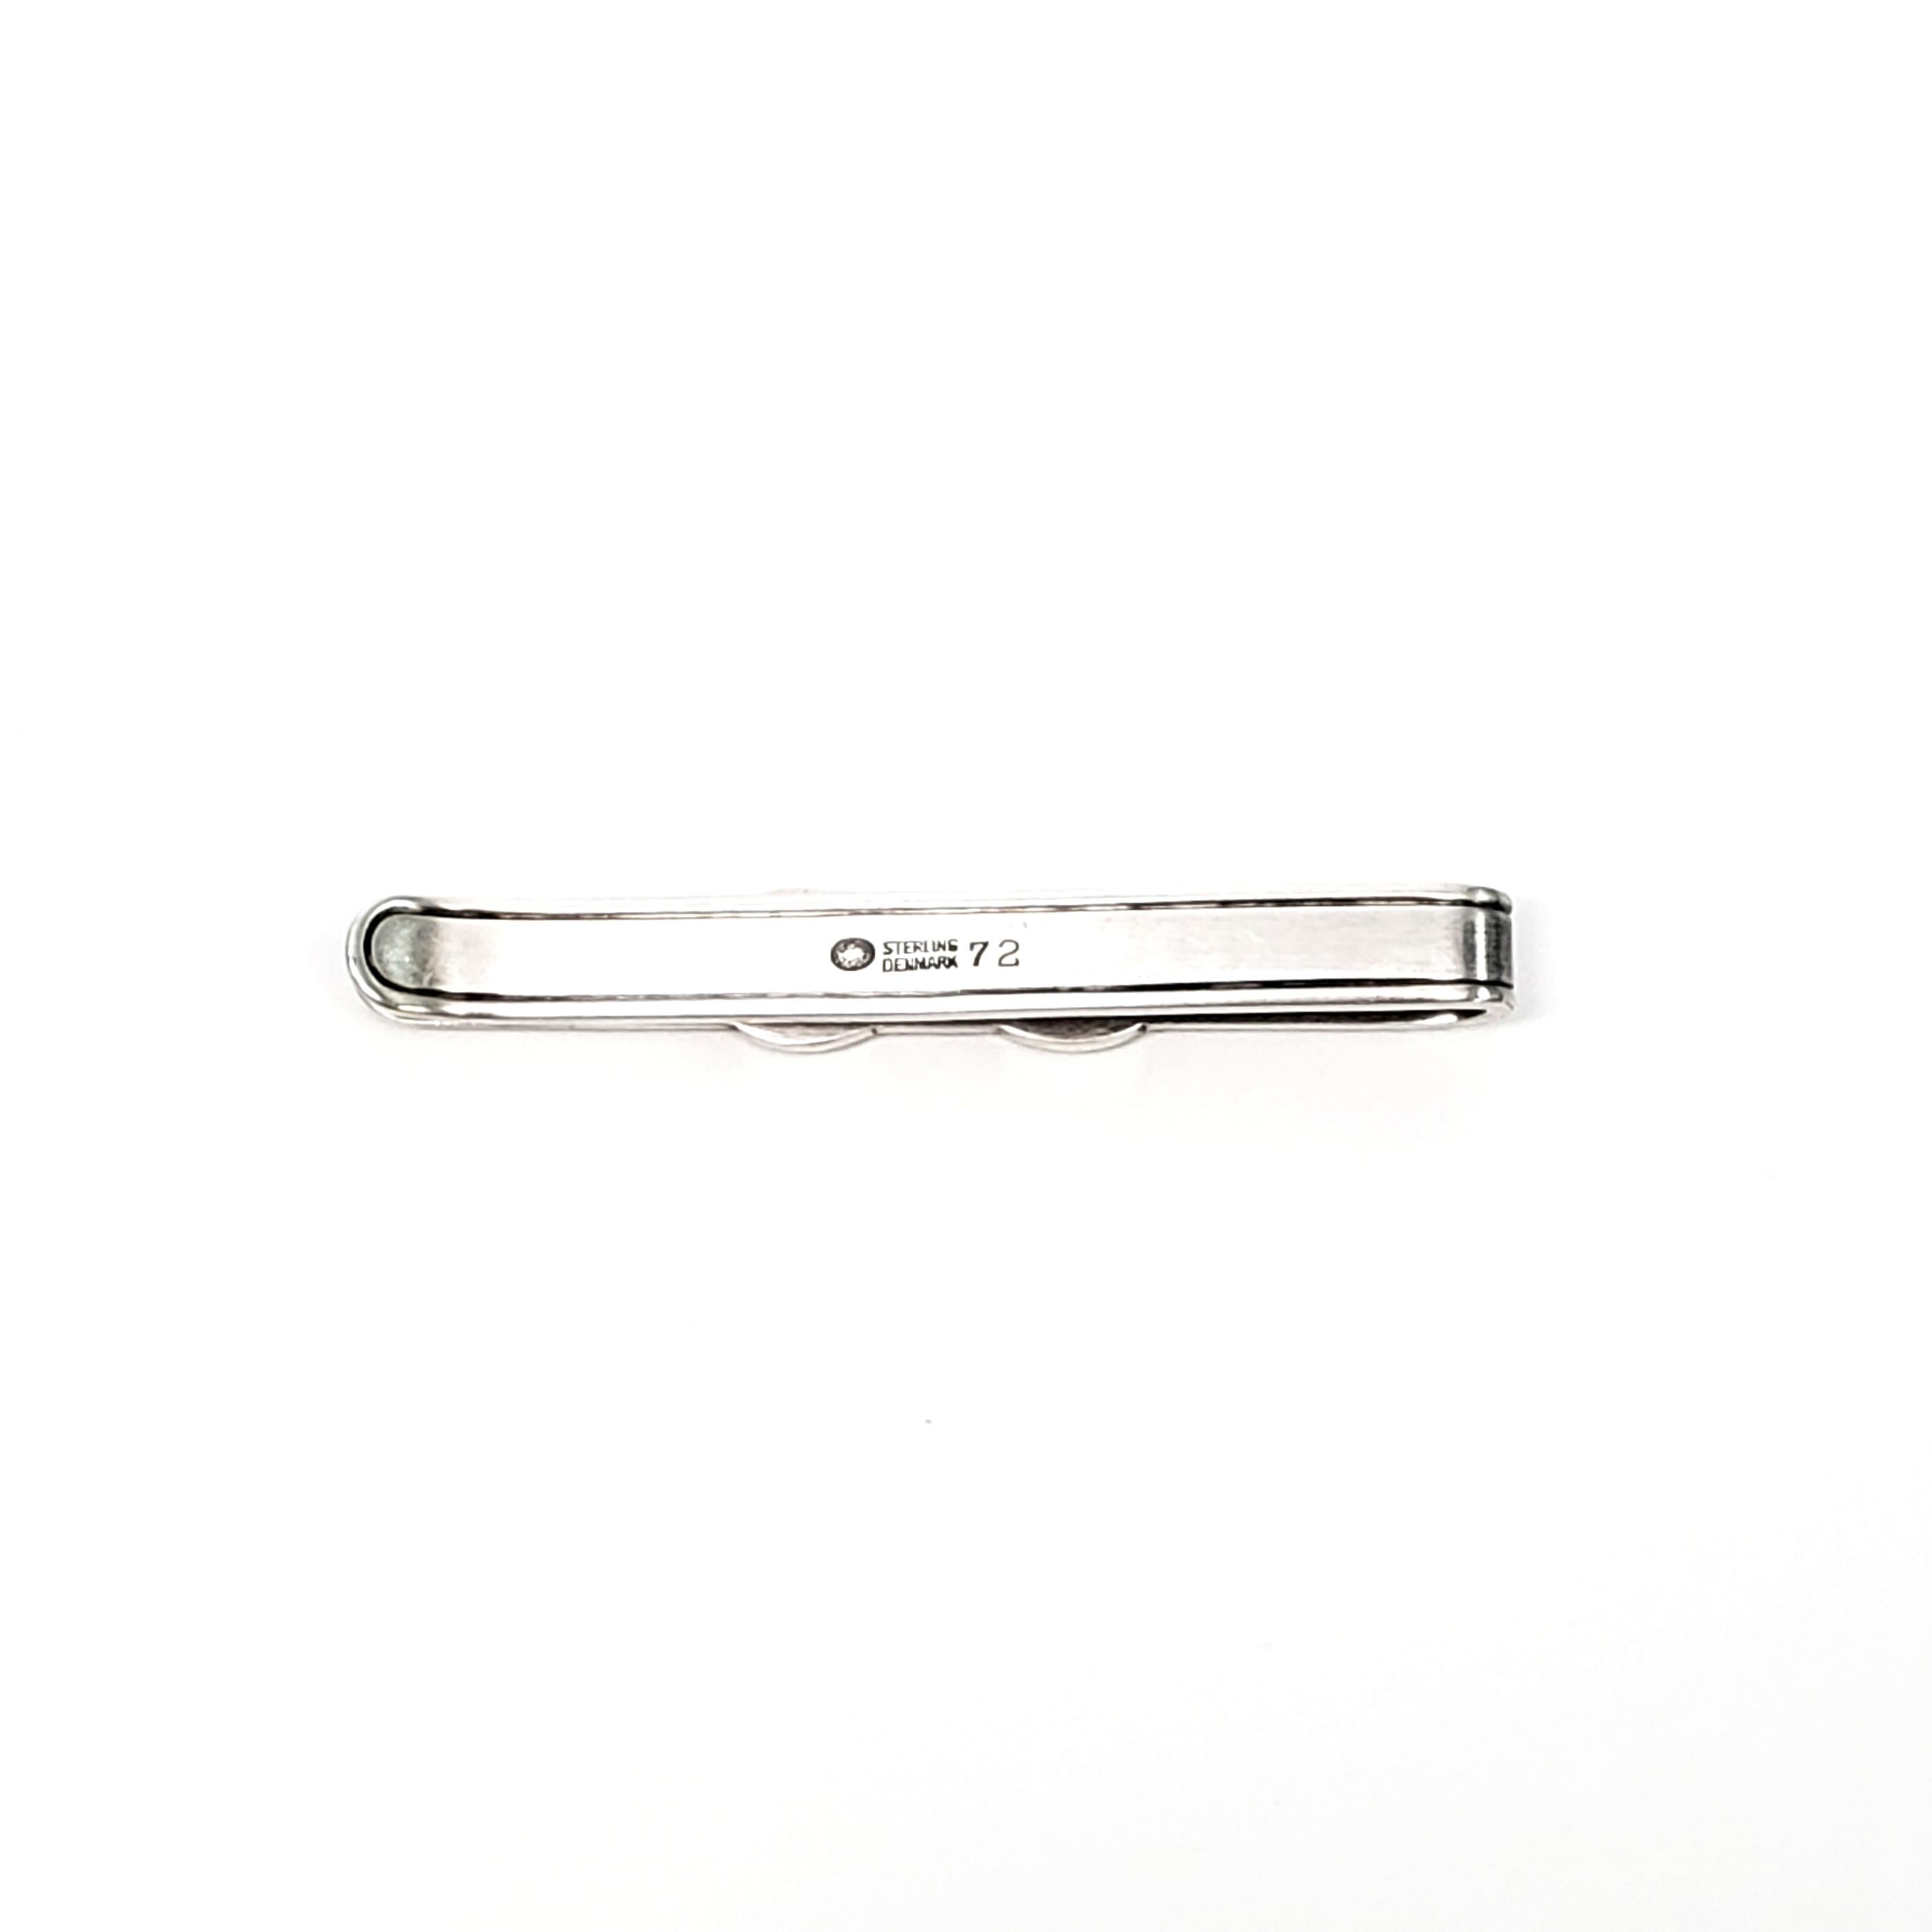 Vintage Georg Jensen Denmark sterling silver tie bar #72.

This elegant tie bar by Georg Jensen features a shell motif crafted in classic sterling silver.

Measures approx 2 1/4